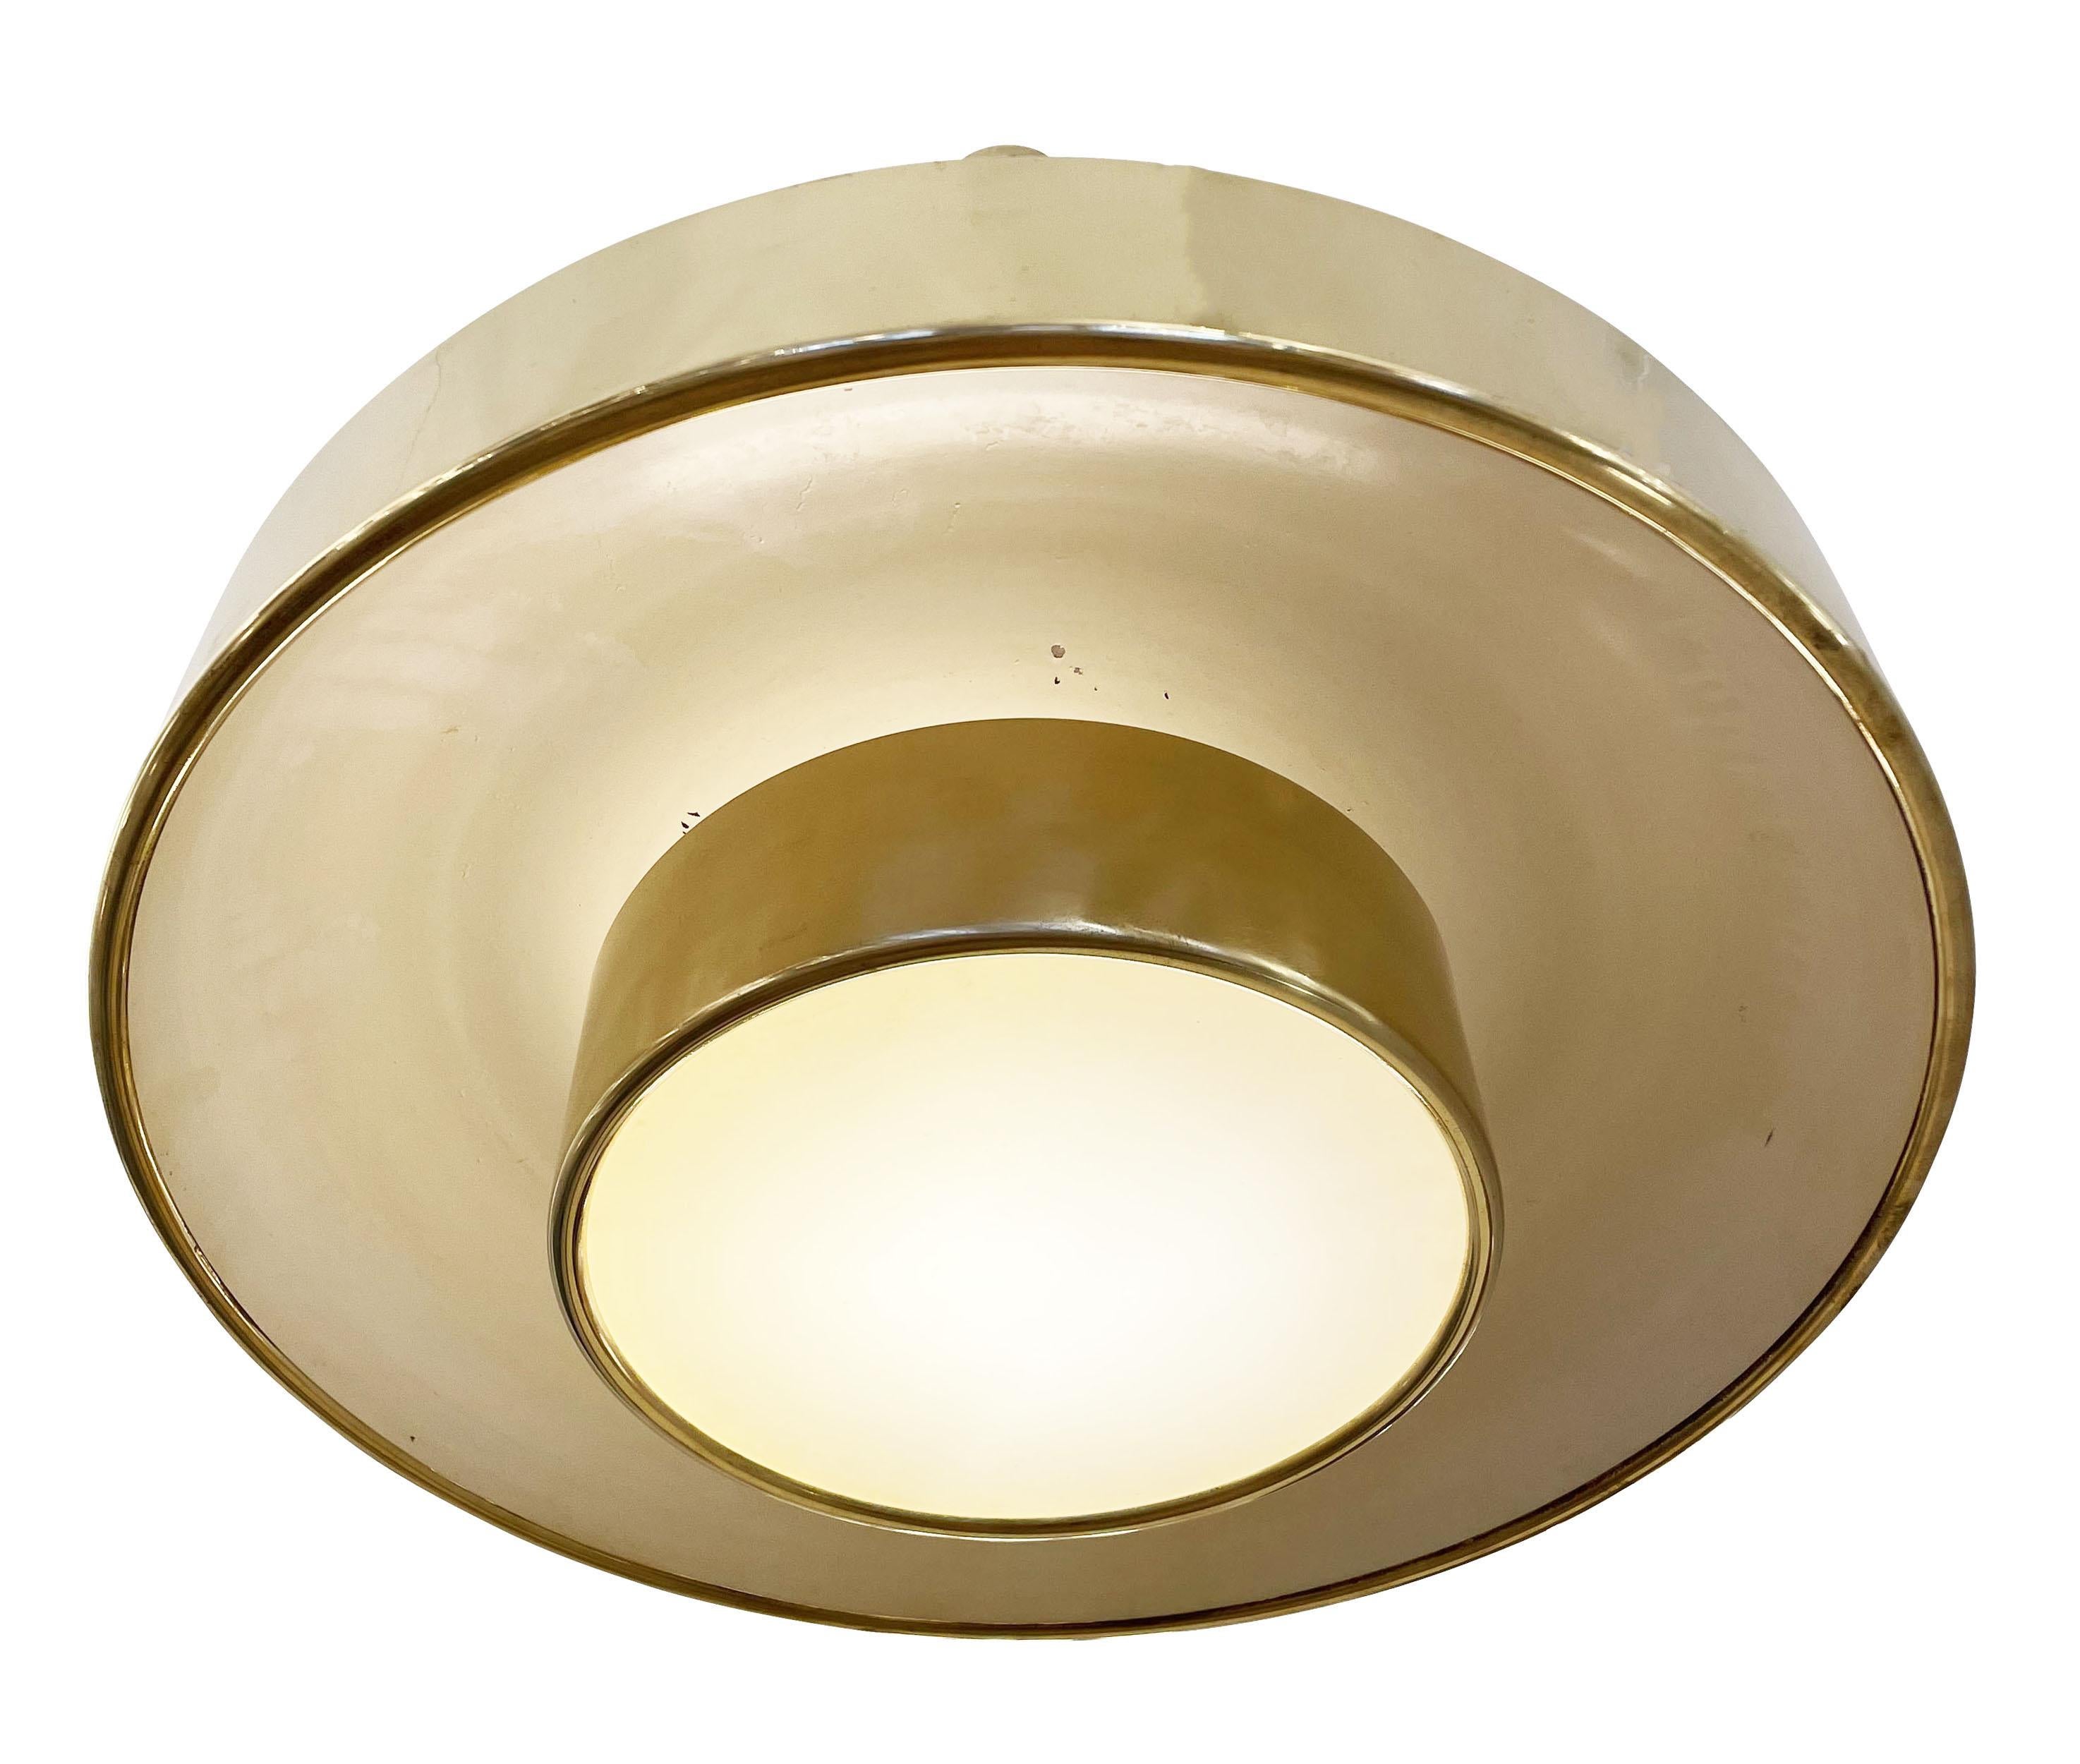 Italian Mid-Century pendant attributed to Gino Sarfatti. The entire piece is made of brass with the central diffuser being partially lacquered off-white to help diffuse the light. It has two glasses; one at the bottom and one above the central